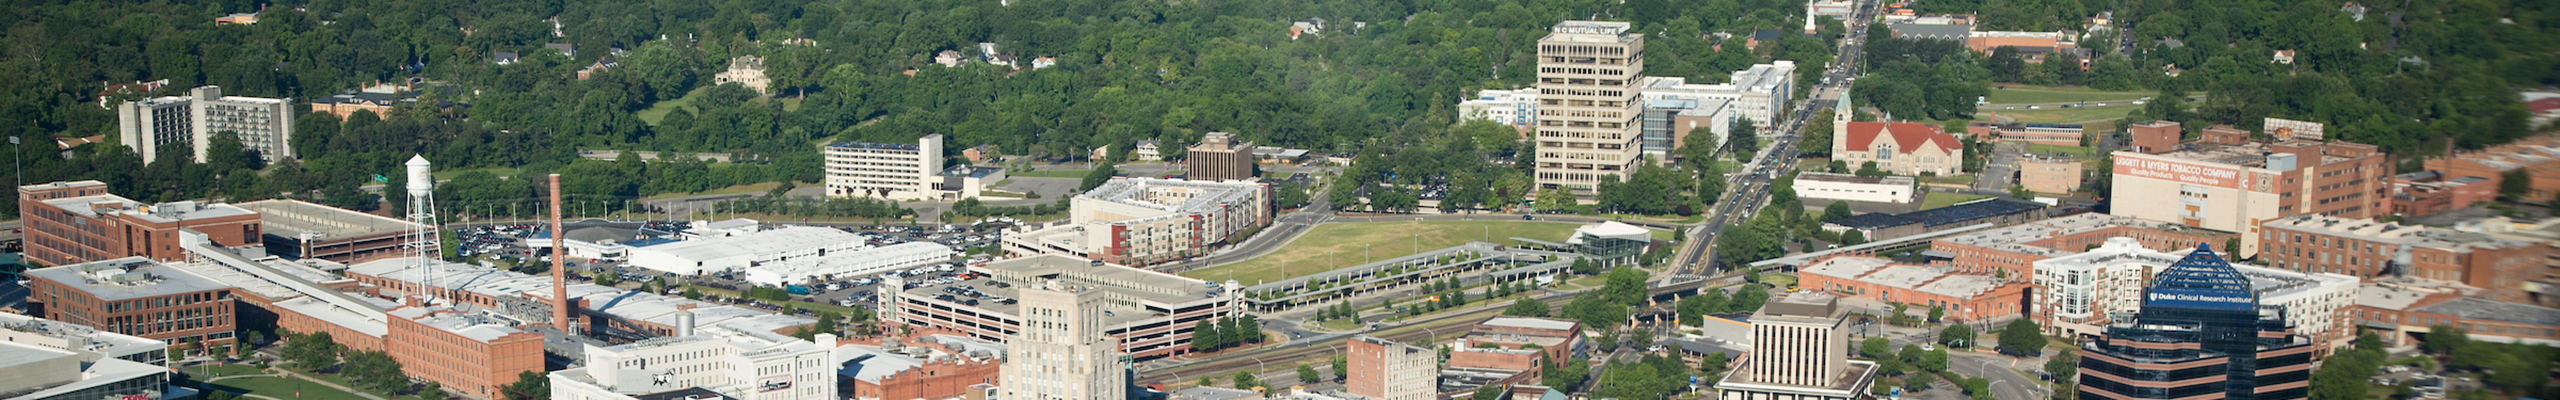 aerial view of downtown Durham